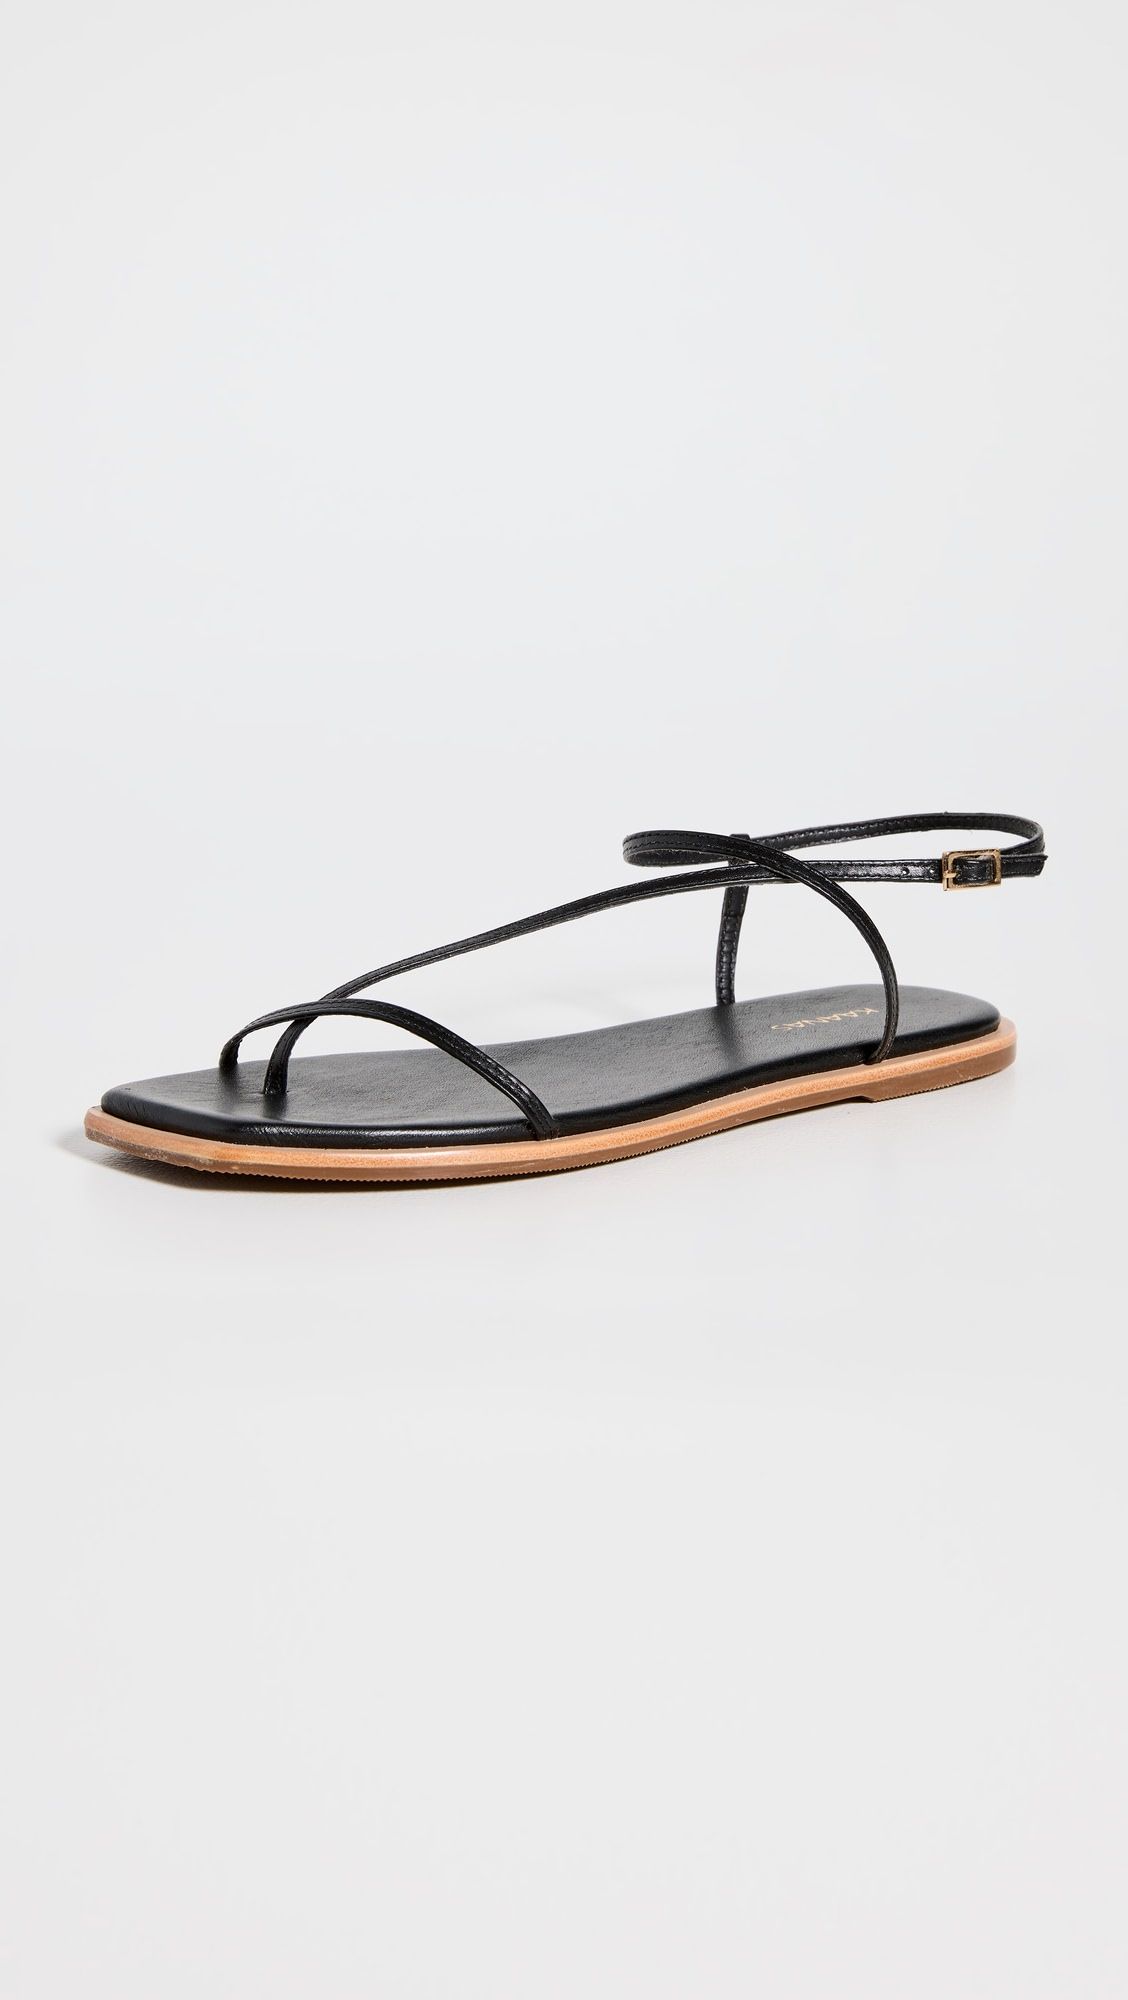 Alayta Square Toe Naked Sandals | Shopbop